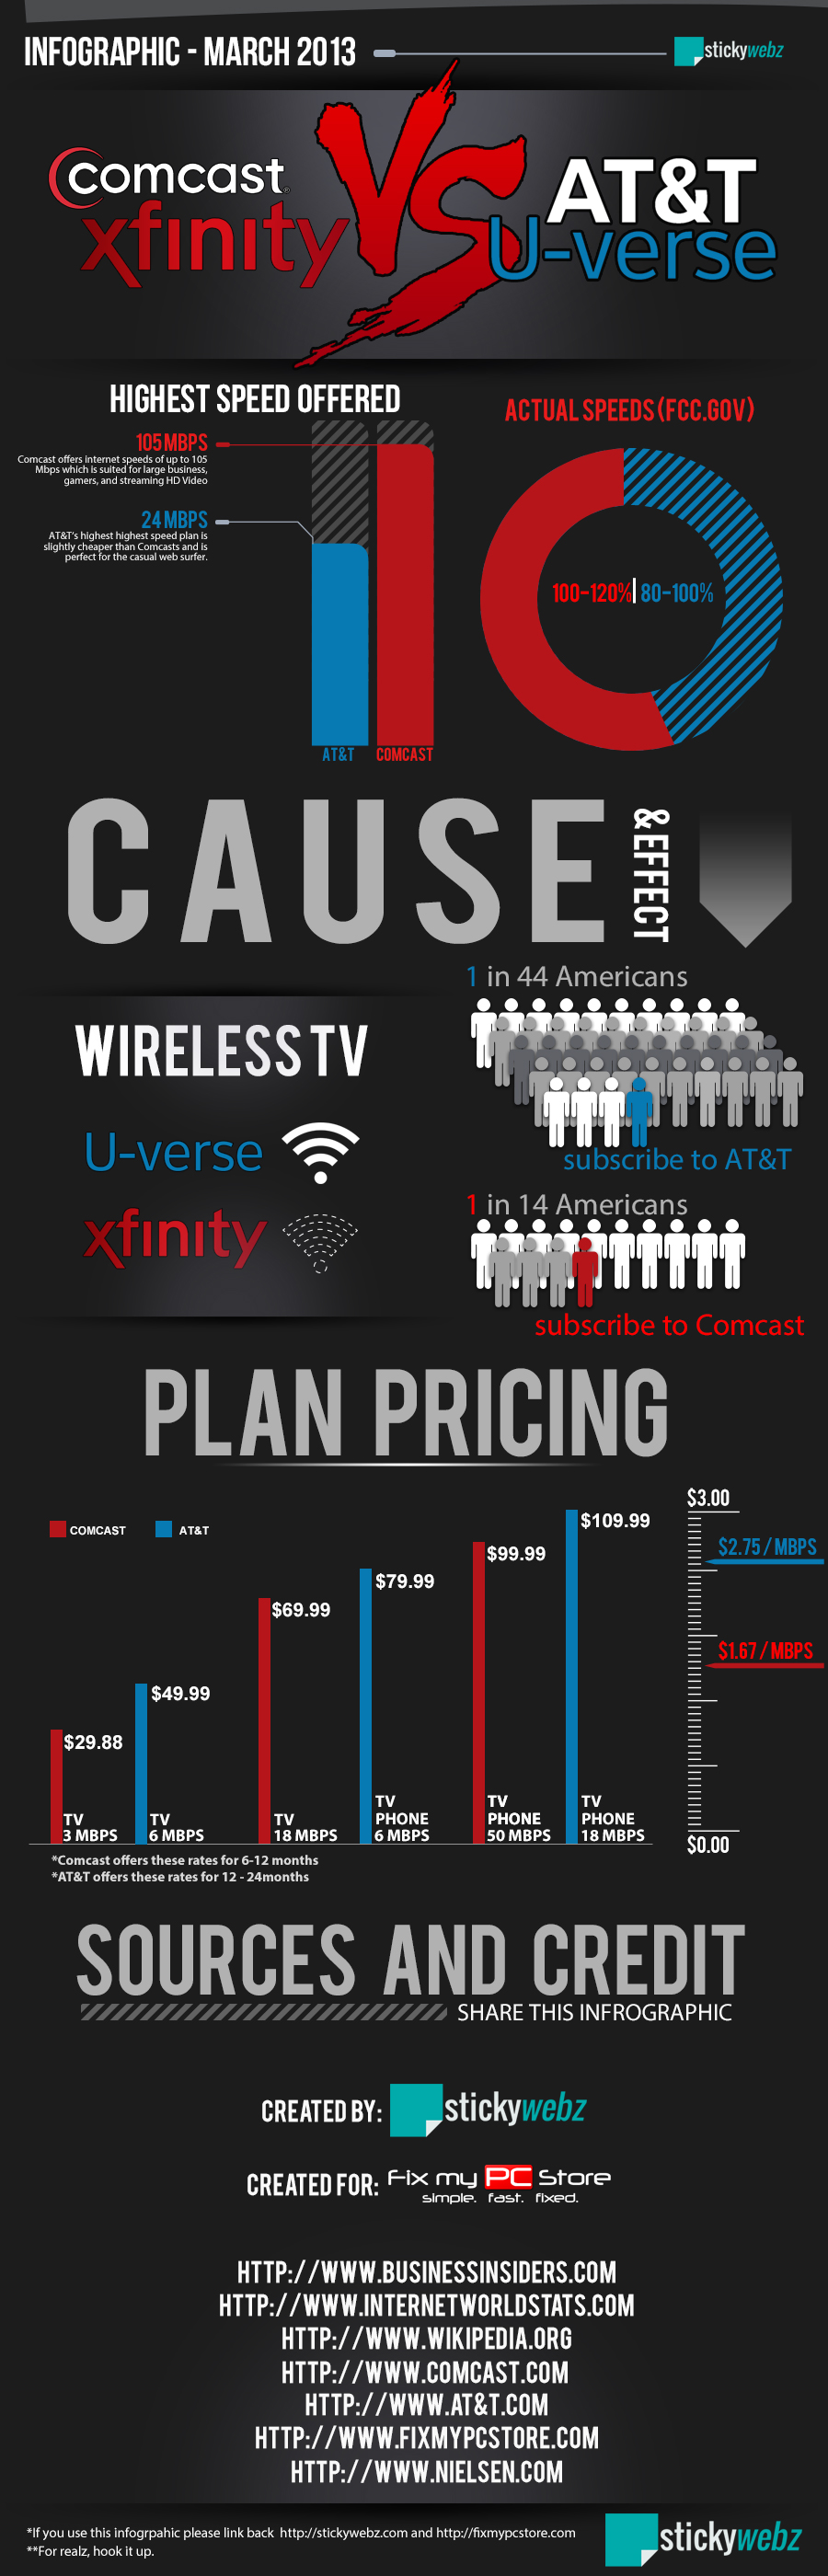 COMPARE XFINITY AND AT&T INTERNET